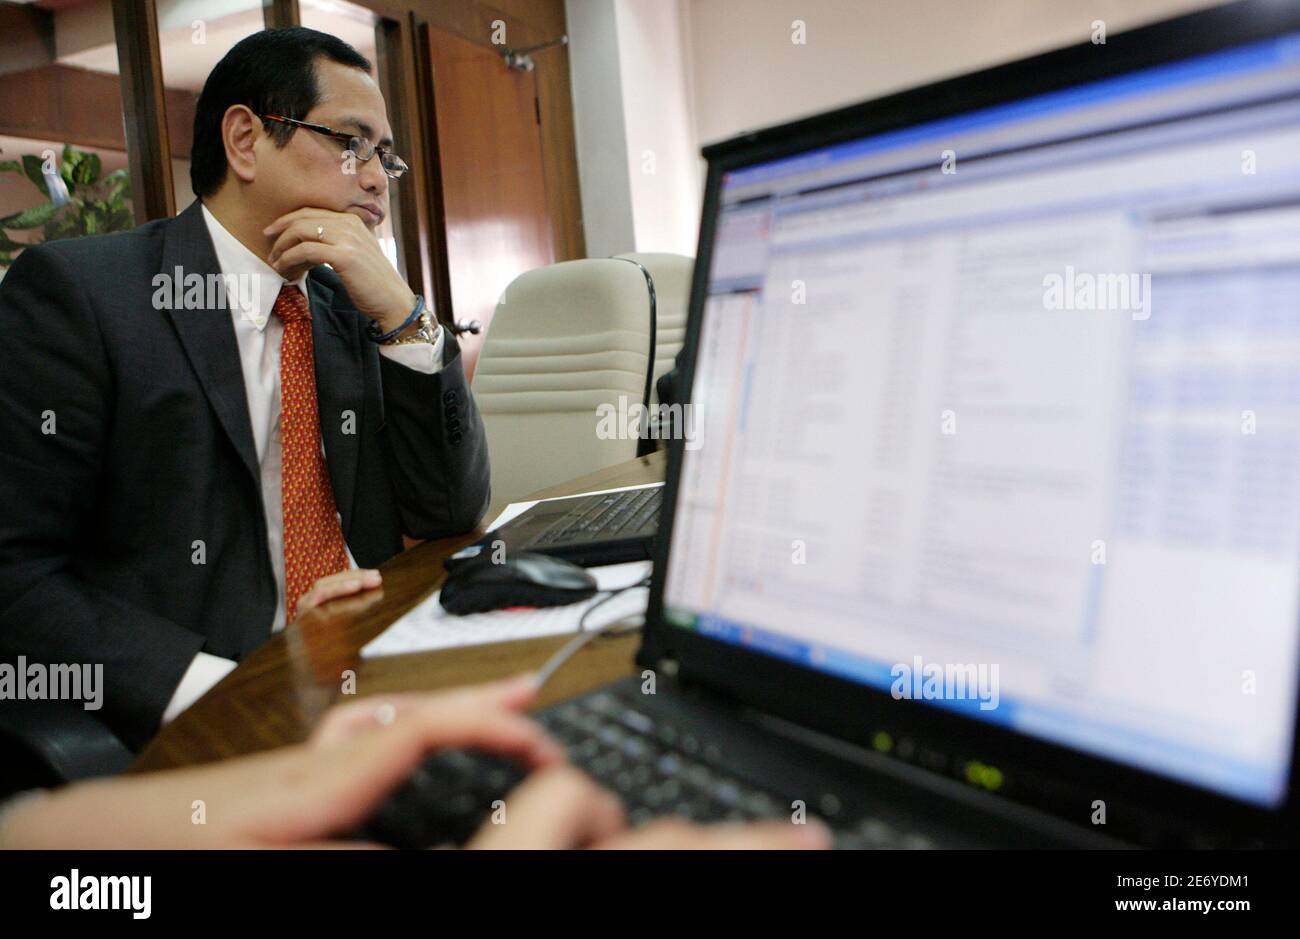 National Treasurer Roberto Tan reads questions from the Dealing Room, a Reuters Messaging chatroom, during an interview in Manila January 25, 2010. The Philippines may complete its foreign debt issues for this year by March if market conditions are good, Tan said on Monday.  REUTERS/Cheryl Ravelo  (PHILIPPINES - Tags: BUSINESS) Stock Photo